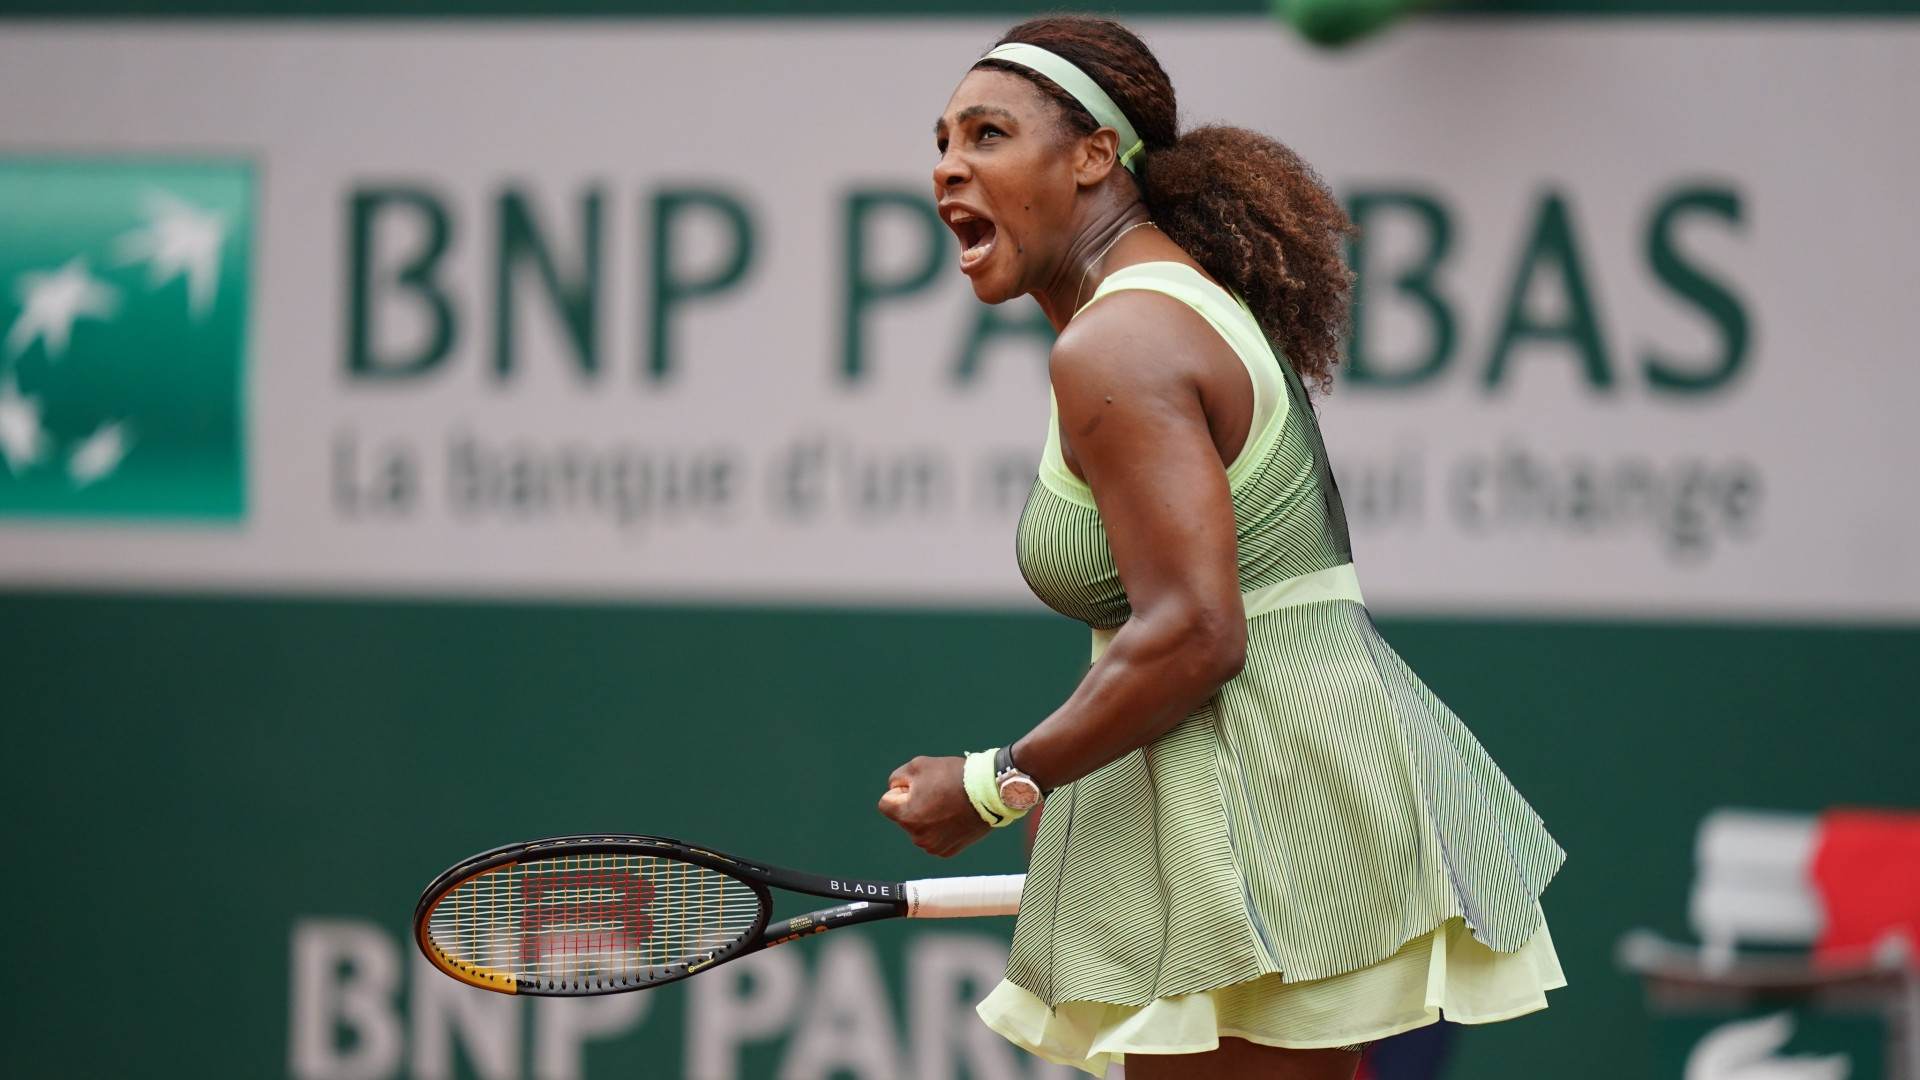 Serena Williams celebrates her victory in the third round of the French Open; Credit: Twitter@rolandgarros